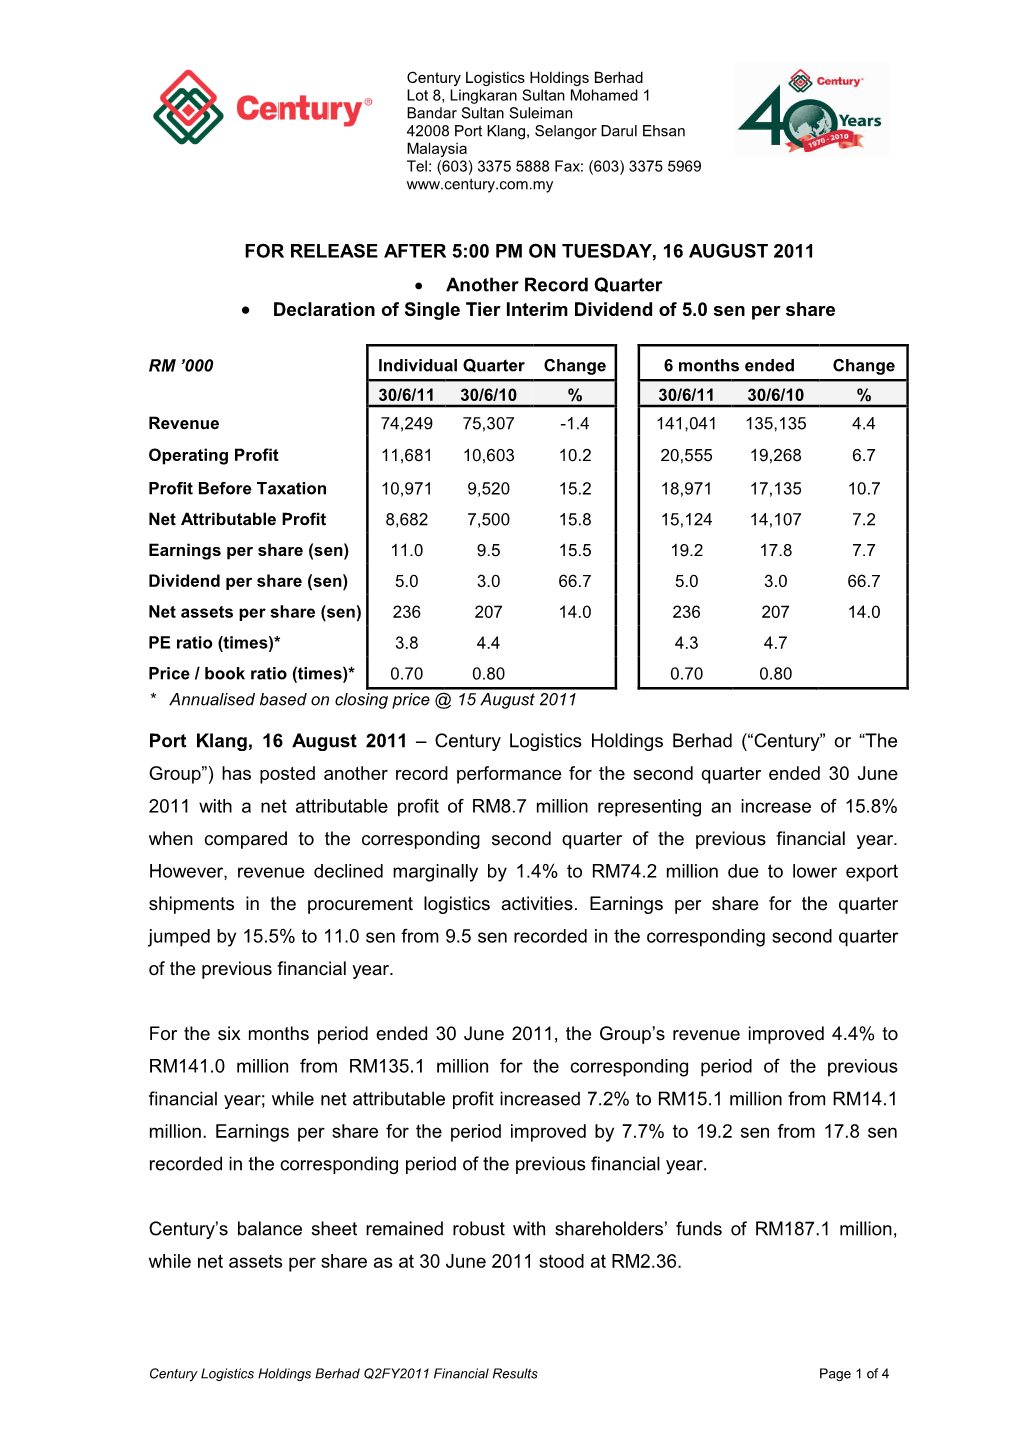 Media Release Q2FY11 Results 3